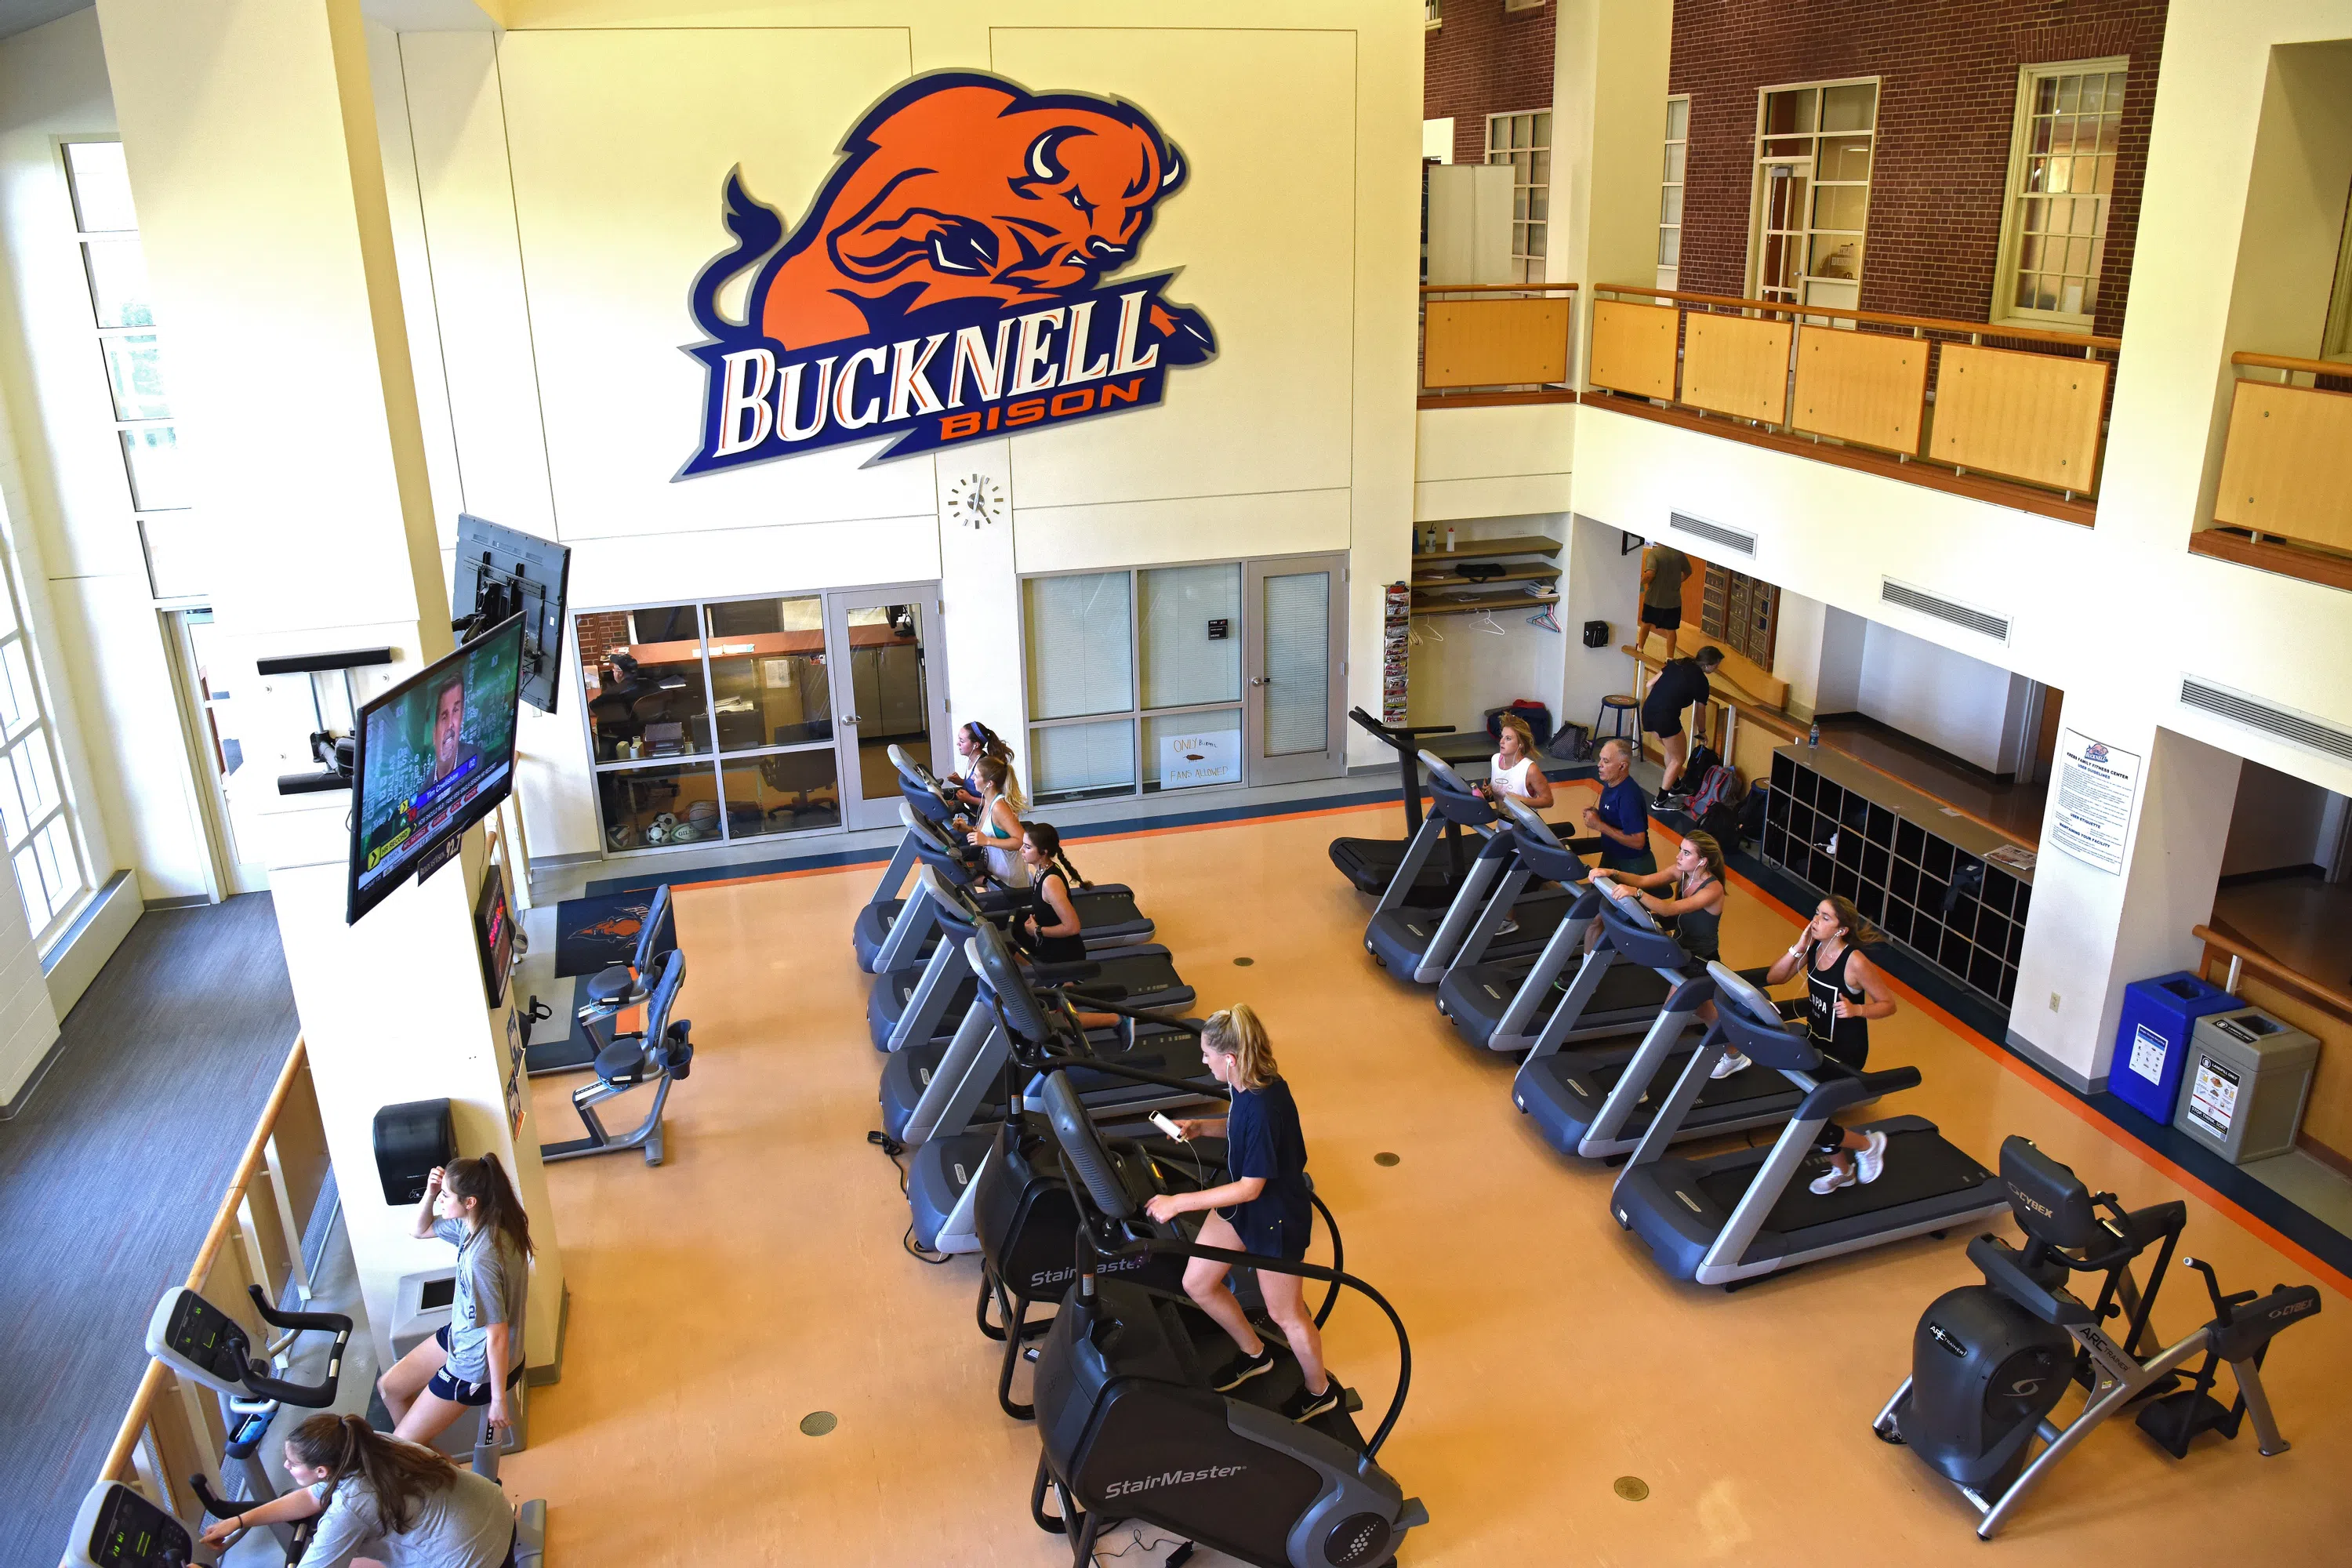 people use exercise equipment in the gym, with a large Bucknell Bison logo on the wall in the background